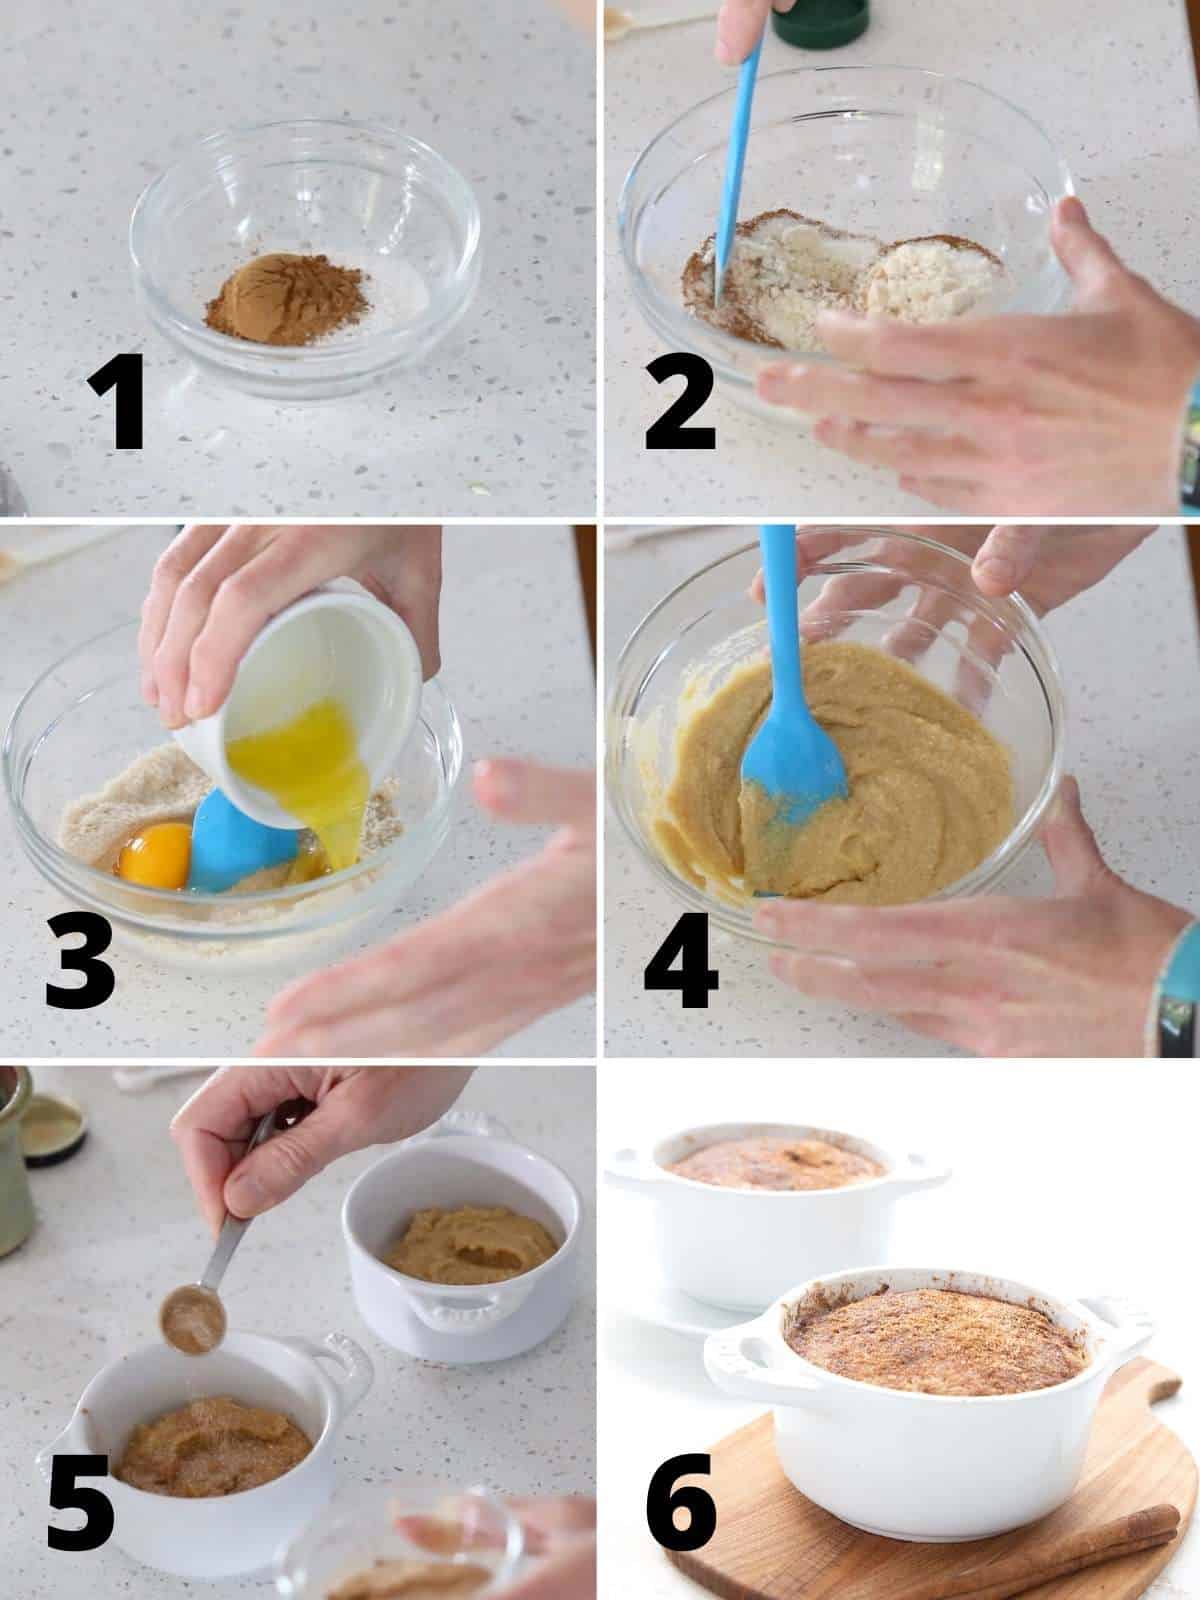 A collage of 6 images showing the steps for making keto mug cakes.